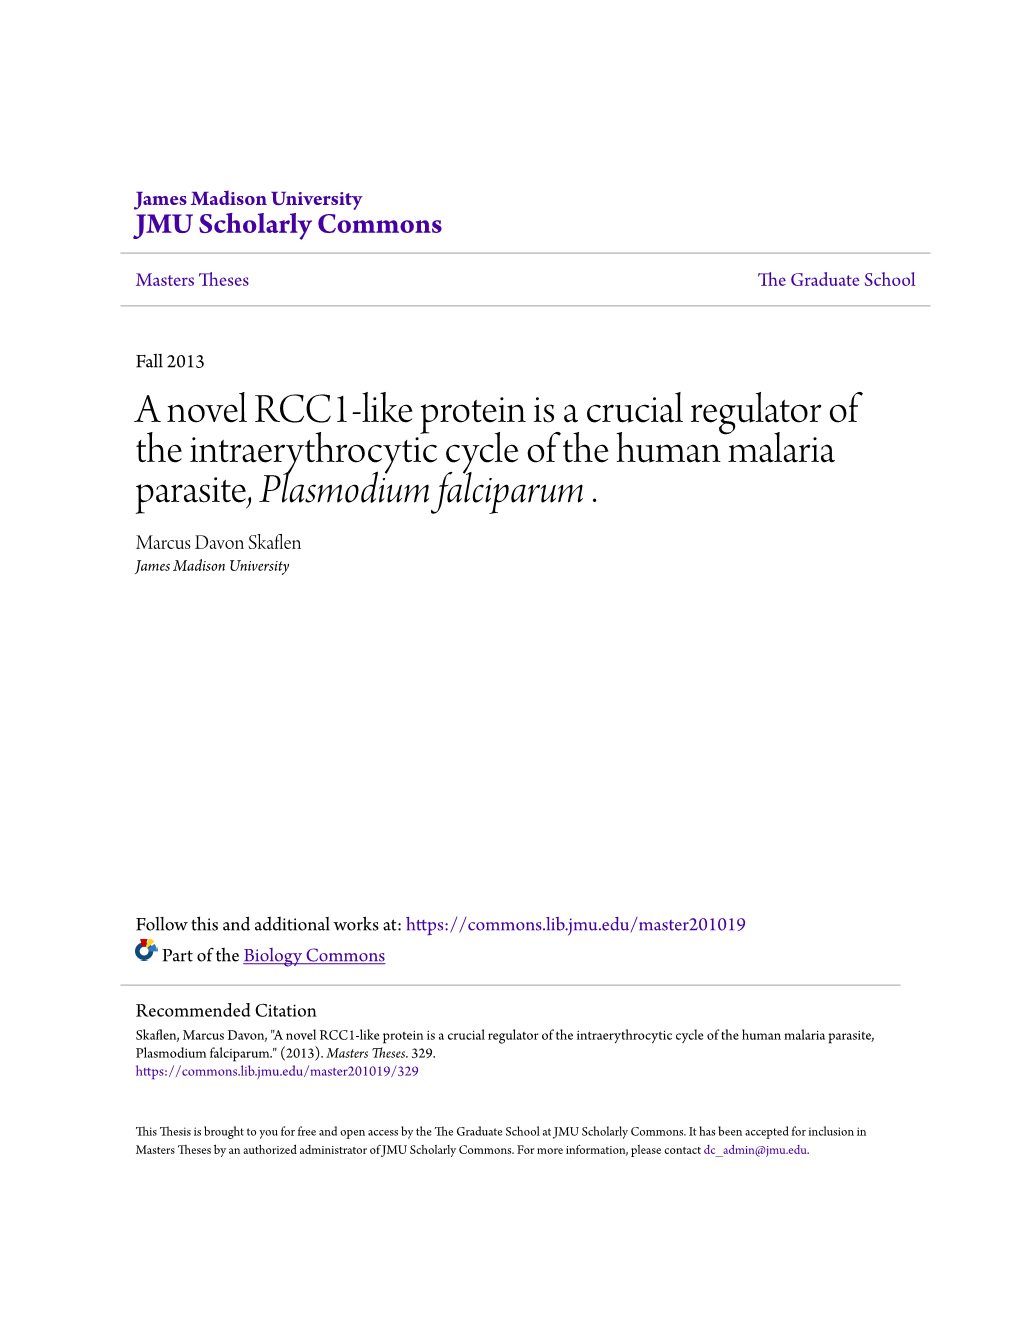 A Novel RCC1-Like Protein Is a Crucial Regulator of the Intraerythrocytic Cycle of the Human Malaria Parasite, Plasmodium Falciparum